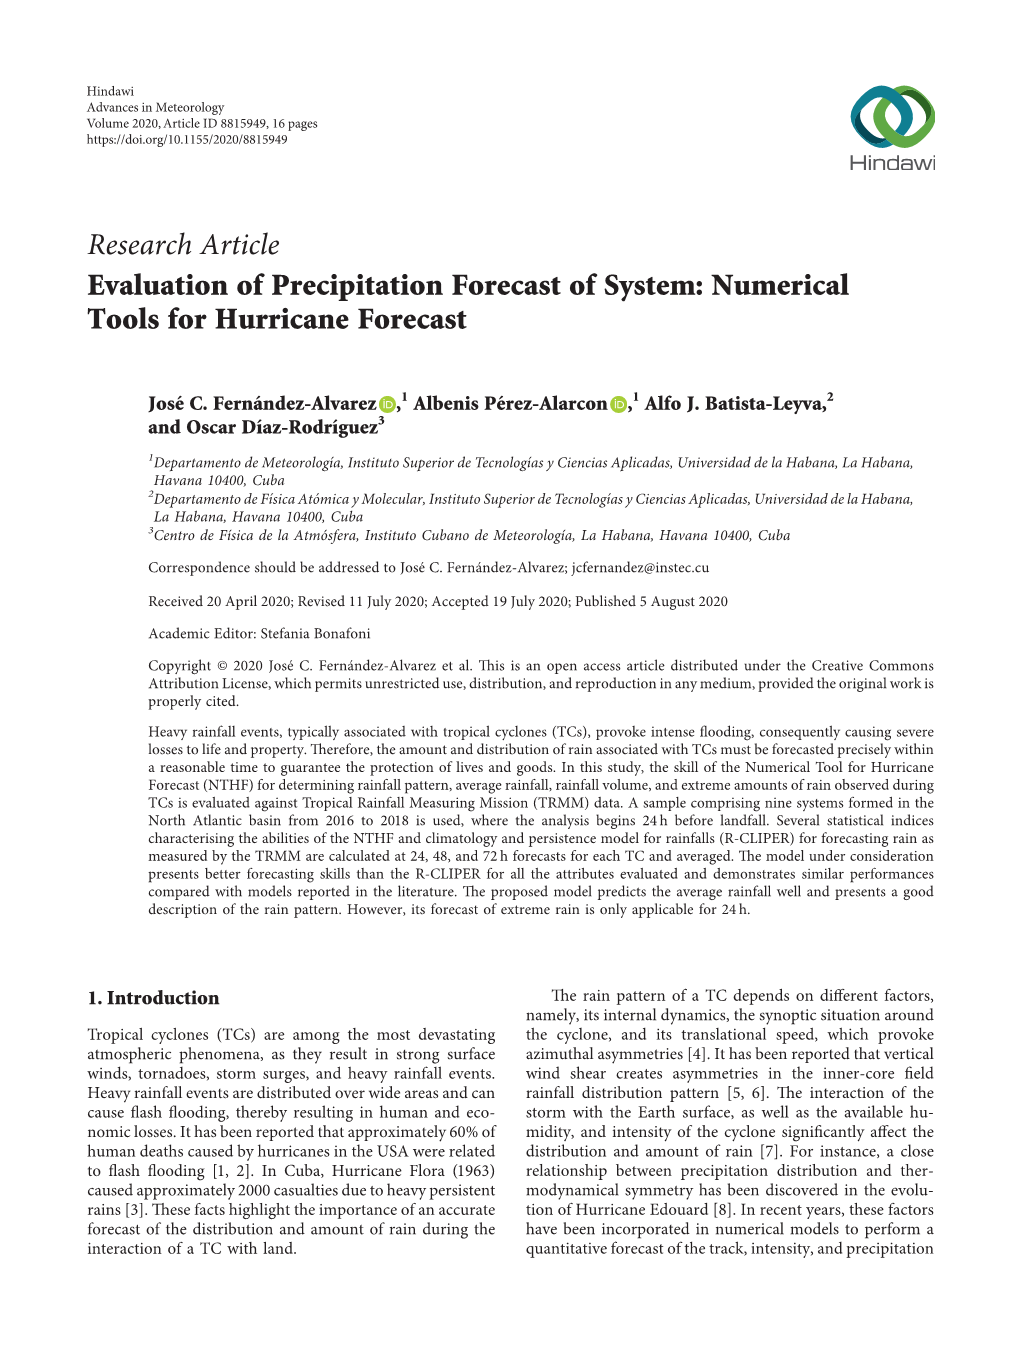 Research Article Evaluation of Precipitation Forecast of System: Numerical Tools for Hurricane Forecast